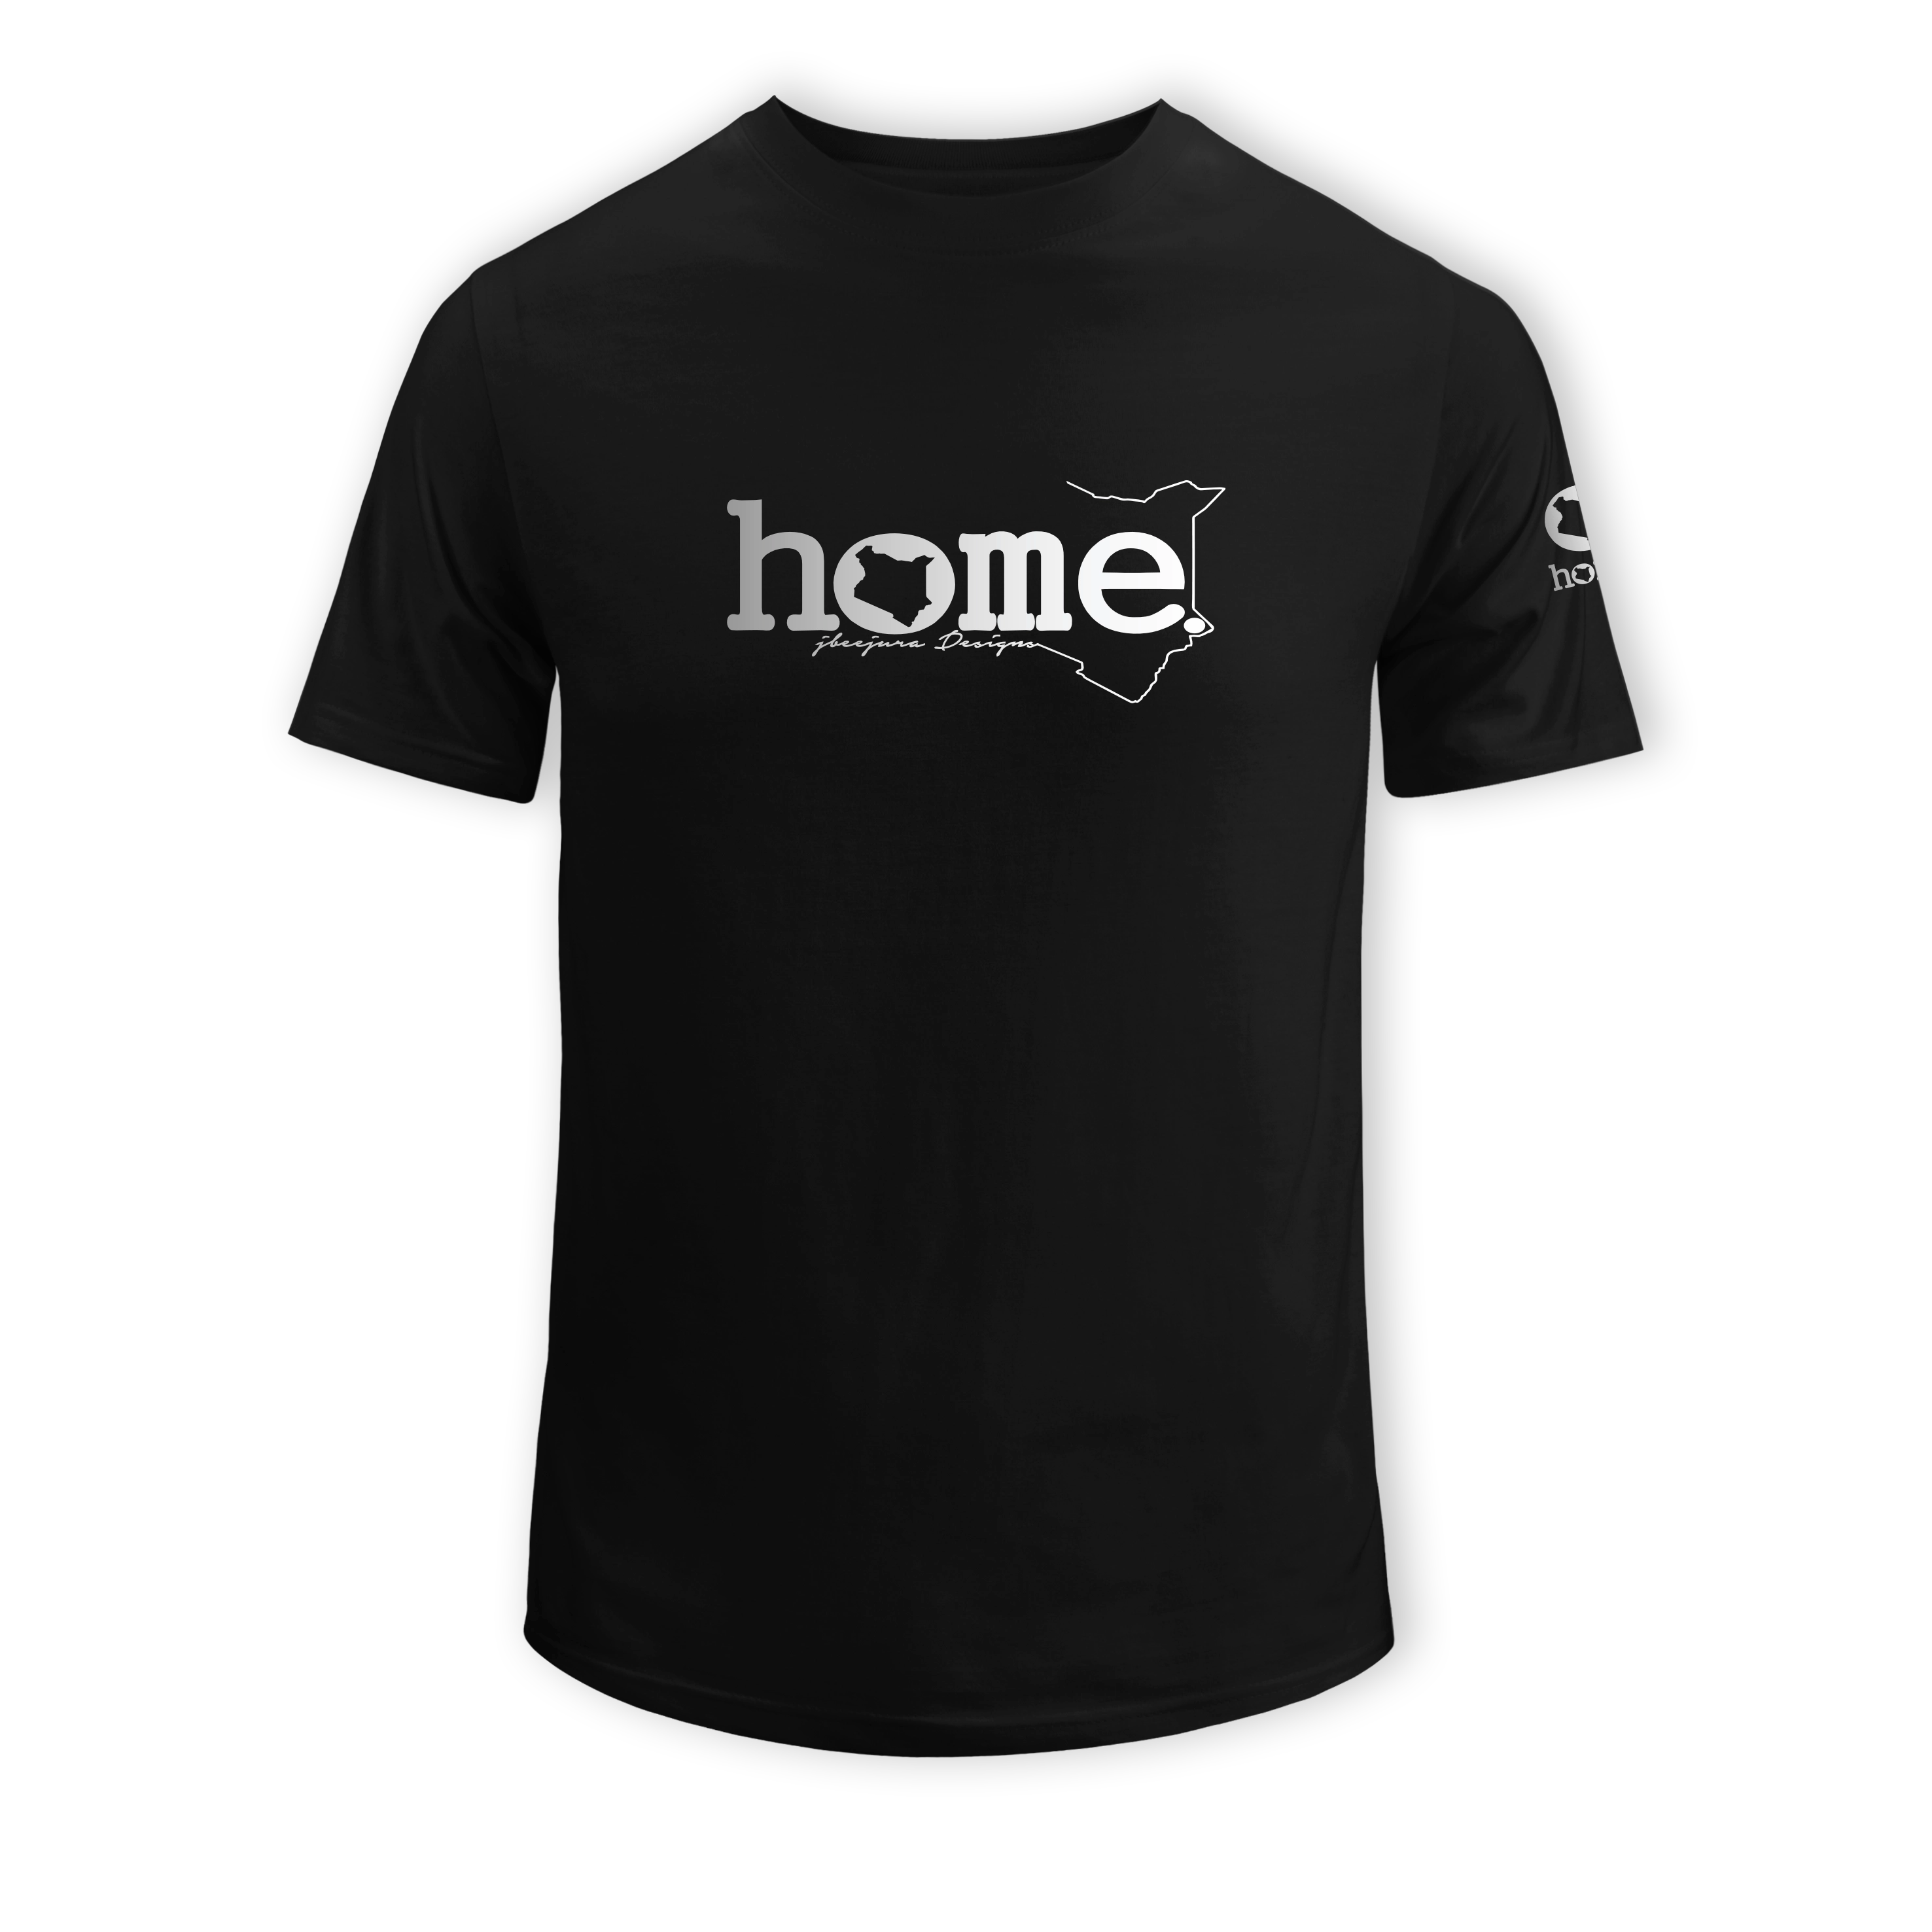 home_254 KIDS SHORT-SLEEVED BLACK T-SHIRT WITH A SILVER CLASSIC WORDS PRINT – COTTON PLUS FABRIC